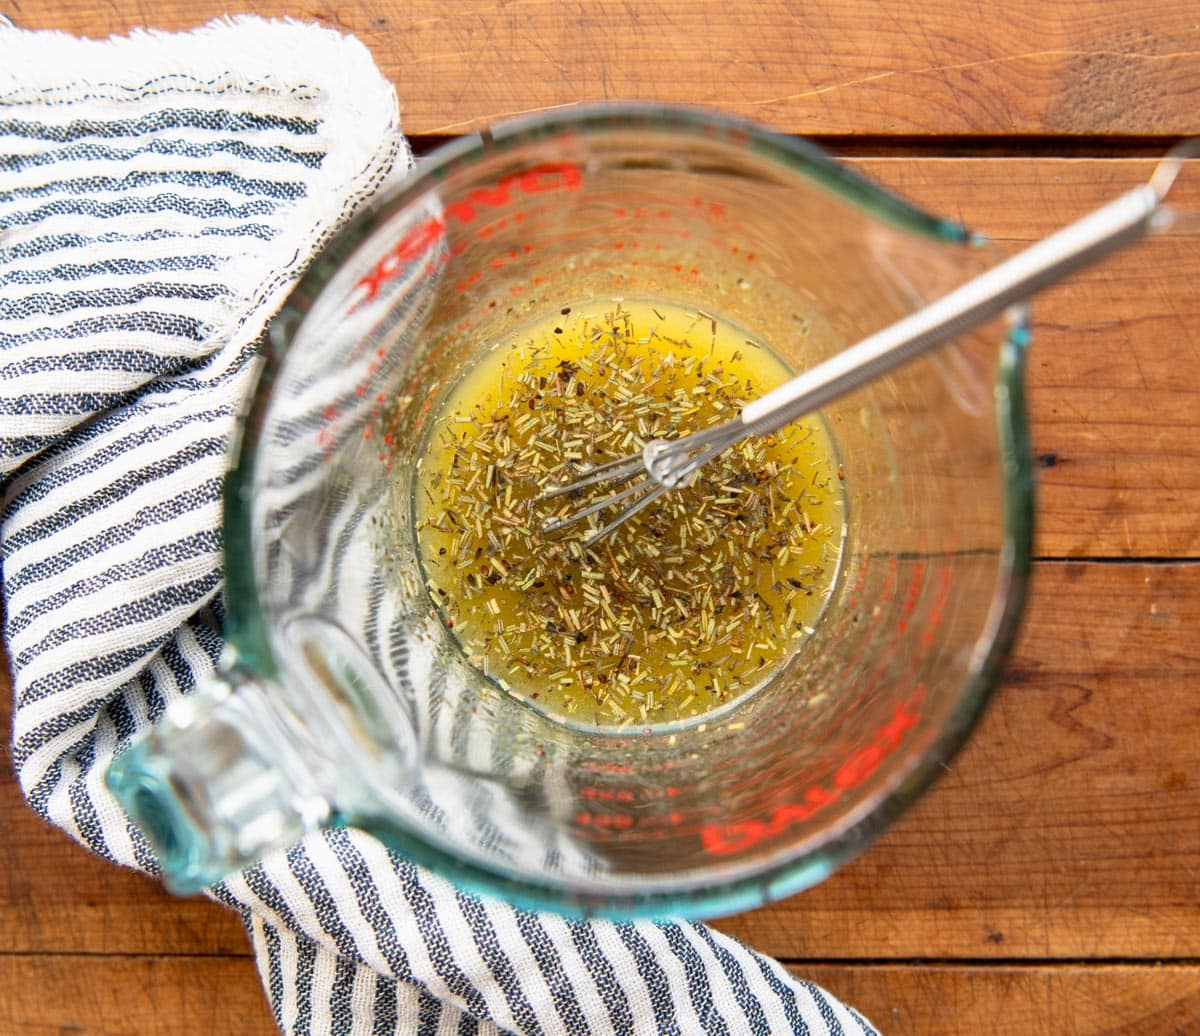 Herb butter sauce for roasting chicken and vegetables.